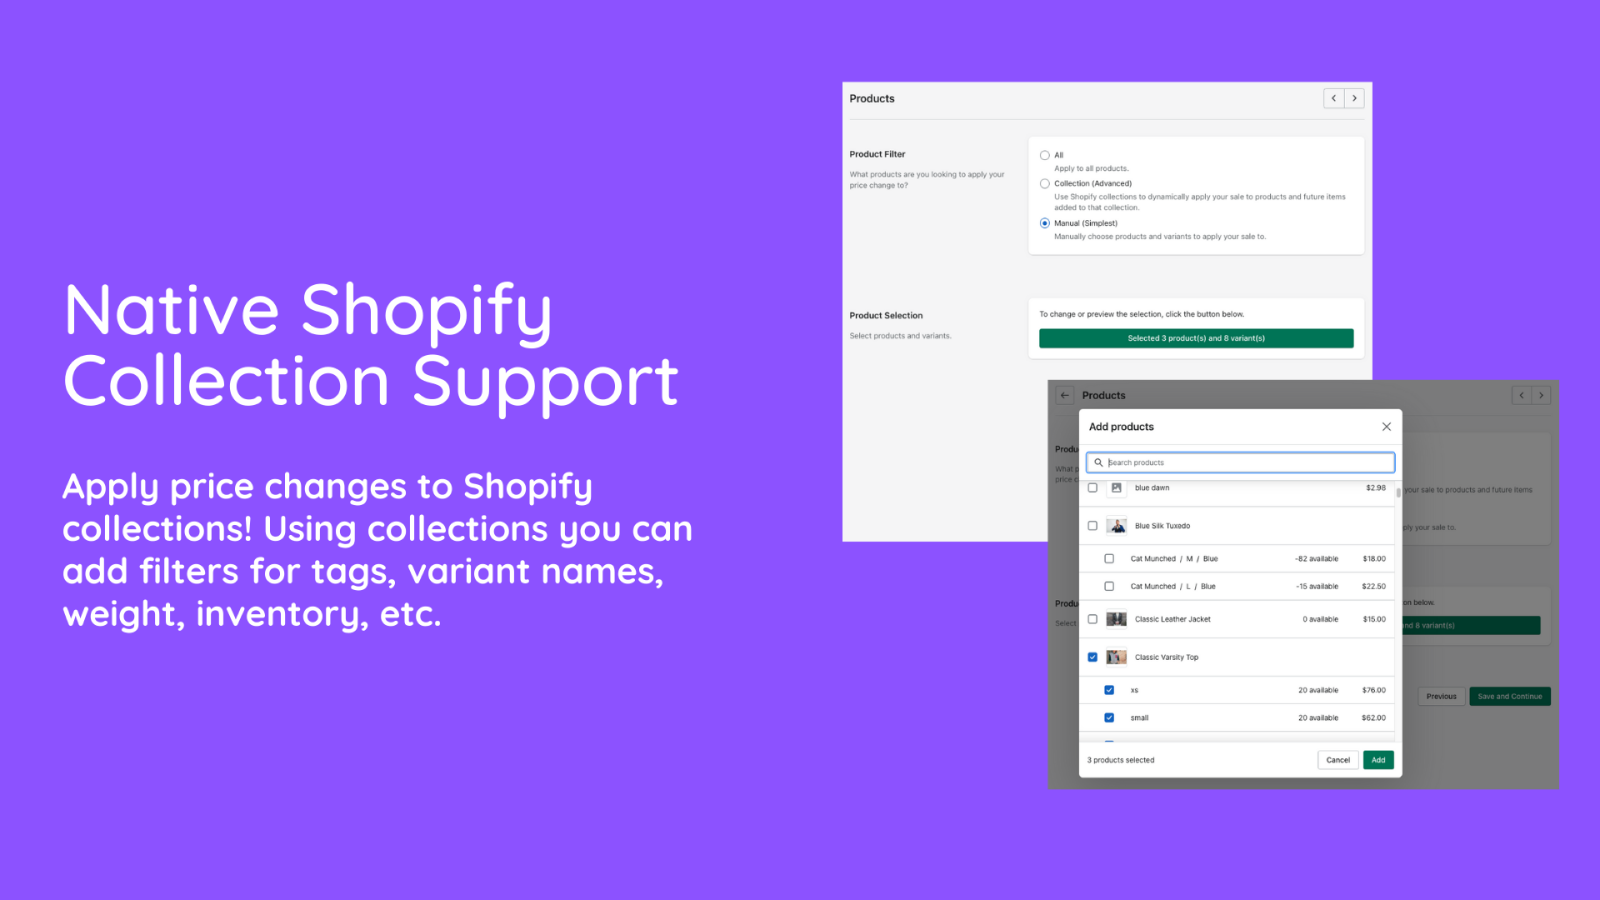 Supports native Shopify collections